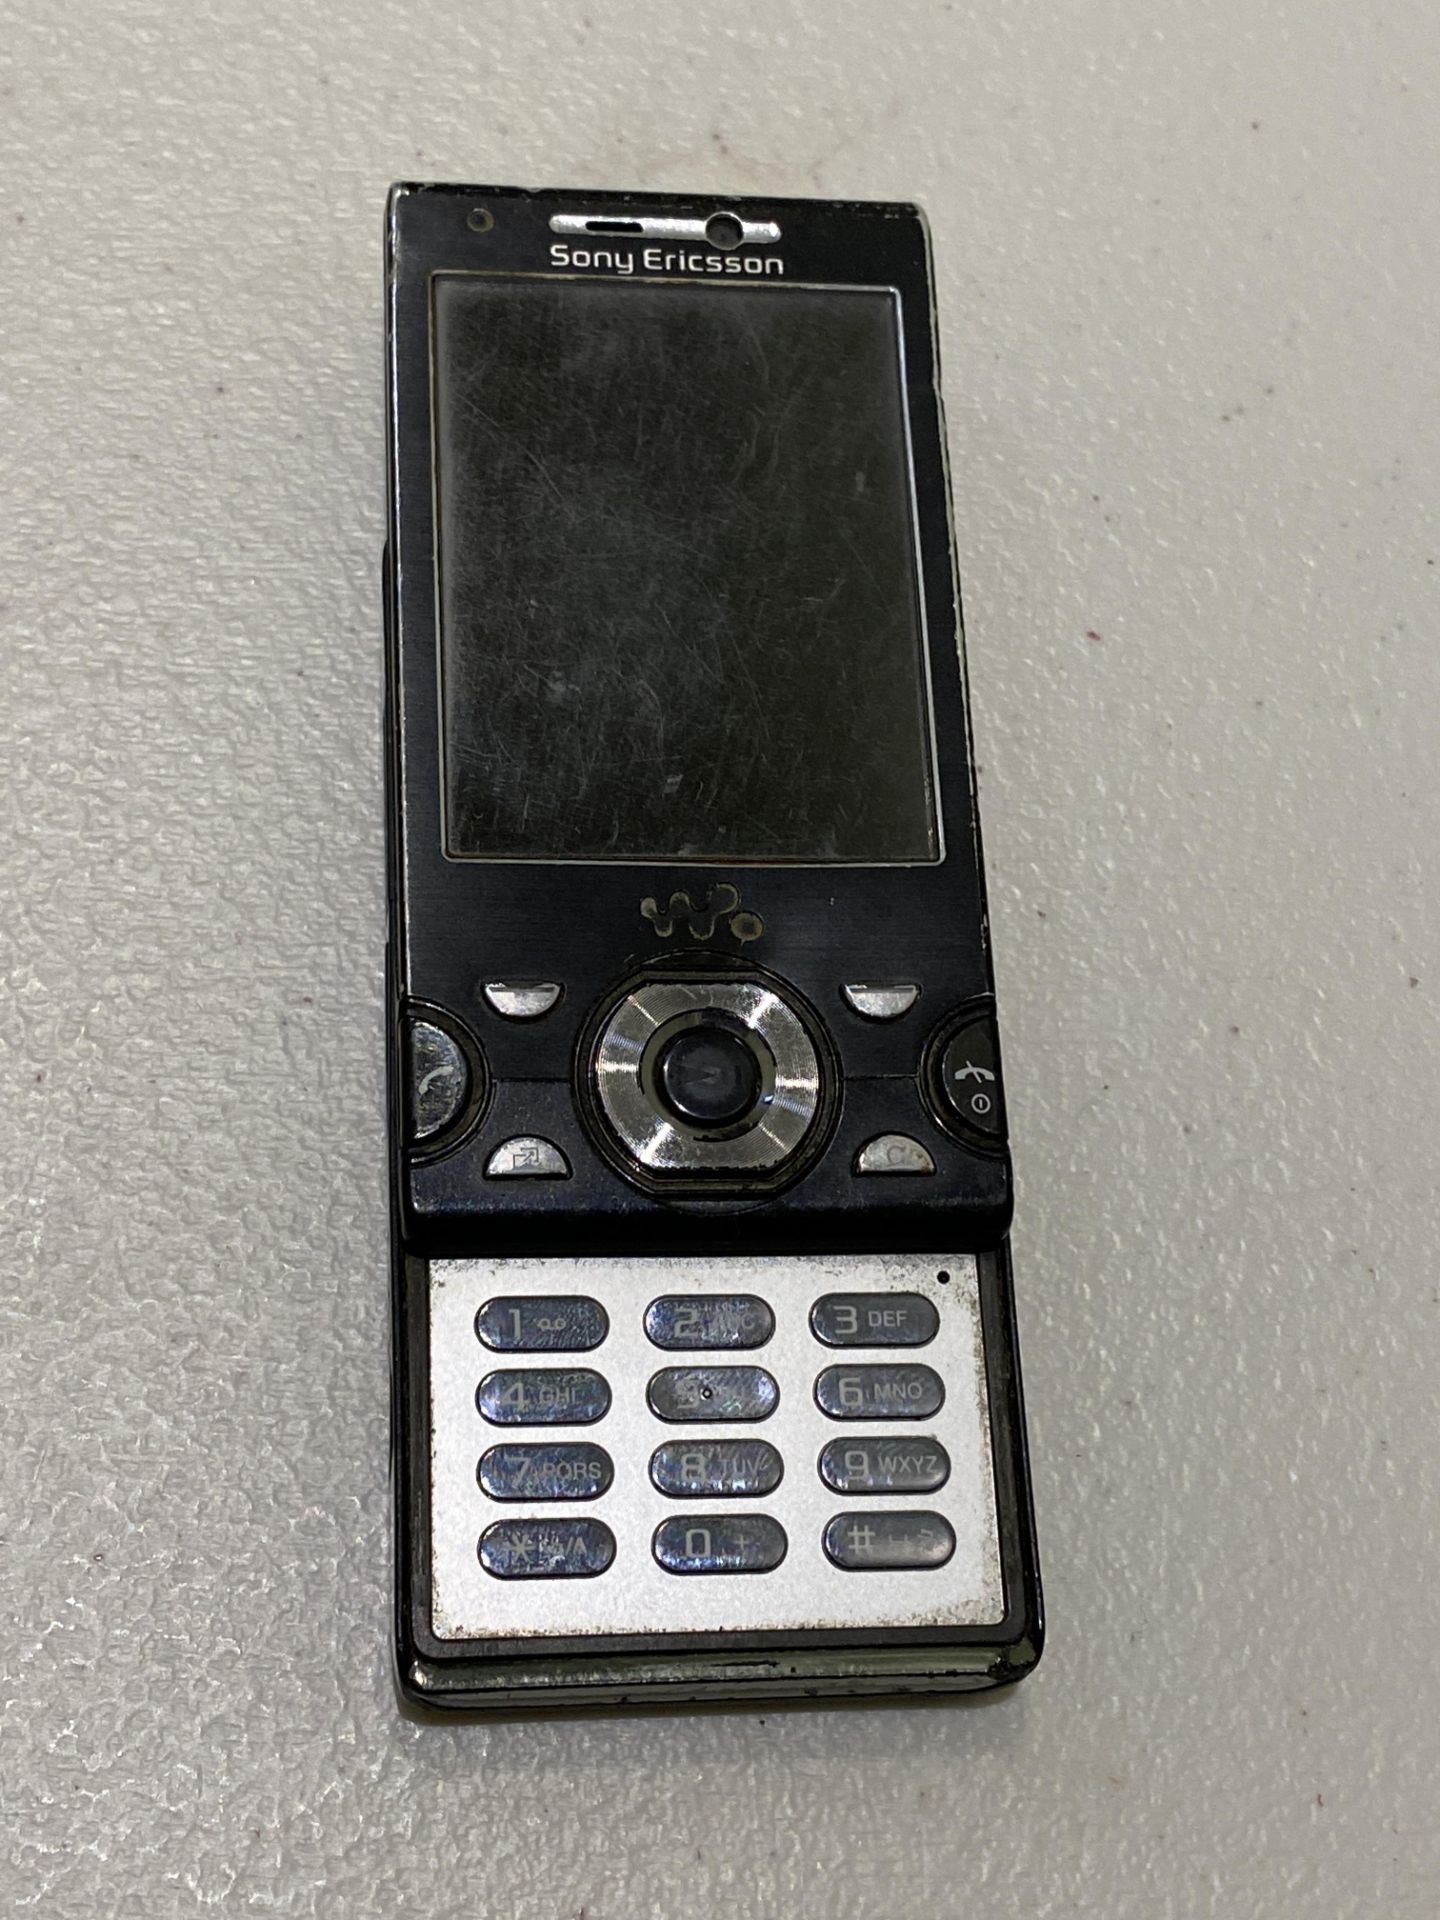 Sony Ericsson Mobile Phone - No Charger - Image 3 of 6